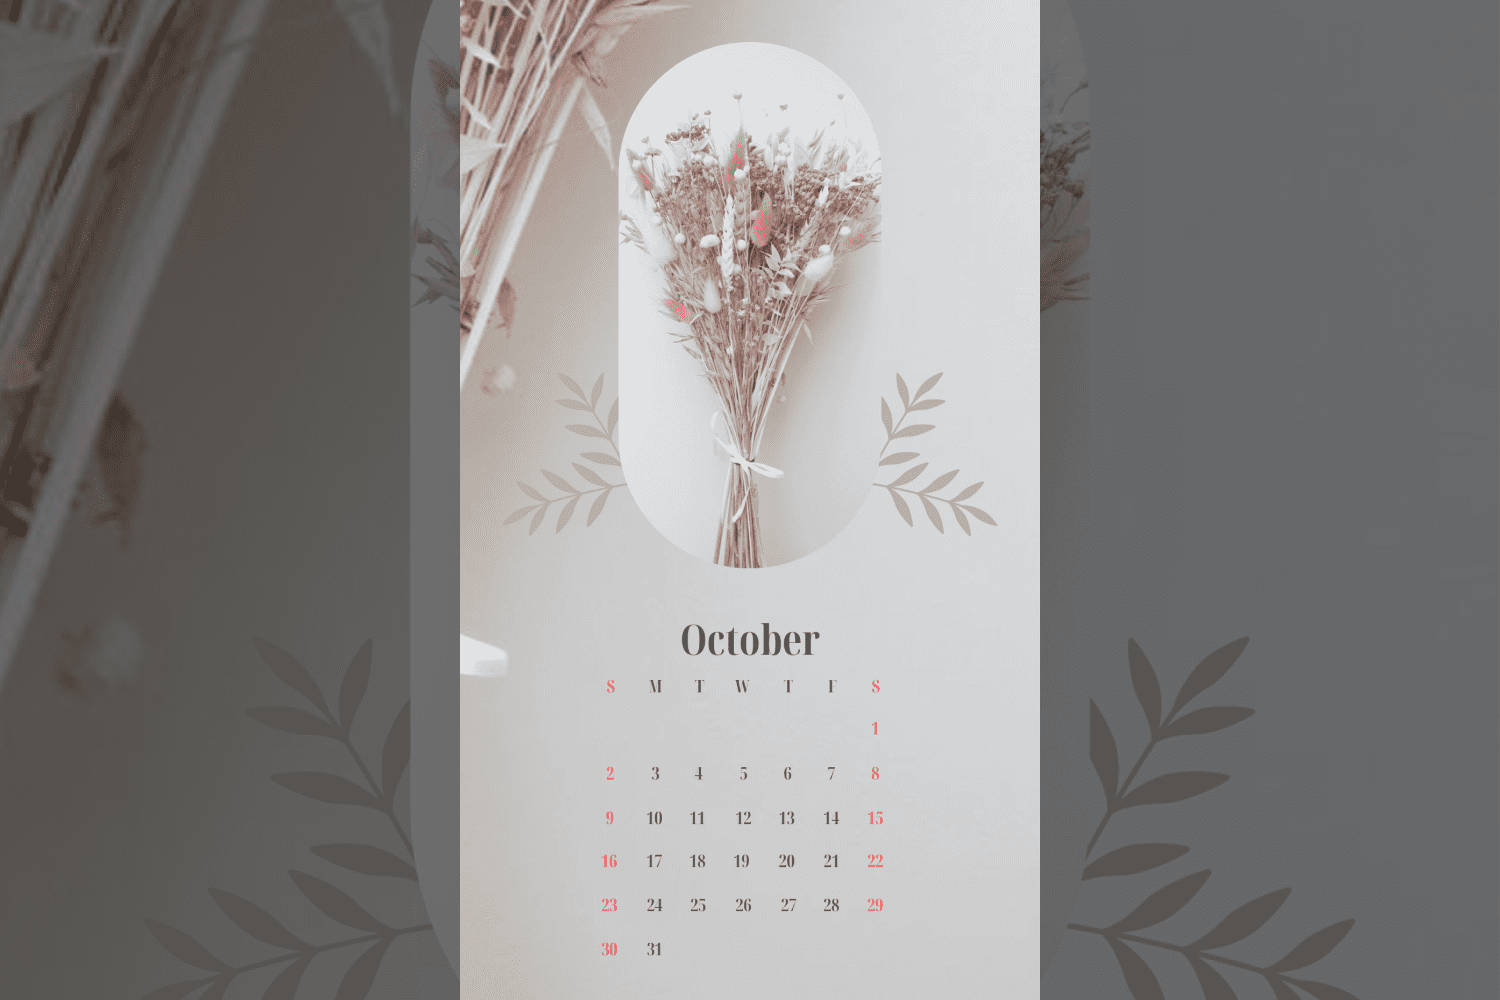 Calendar for October with a photo of a bouquet of dry flowers.